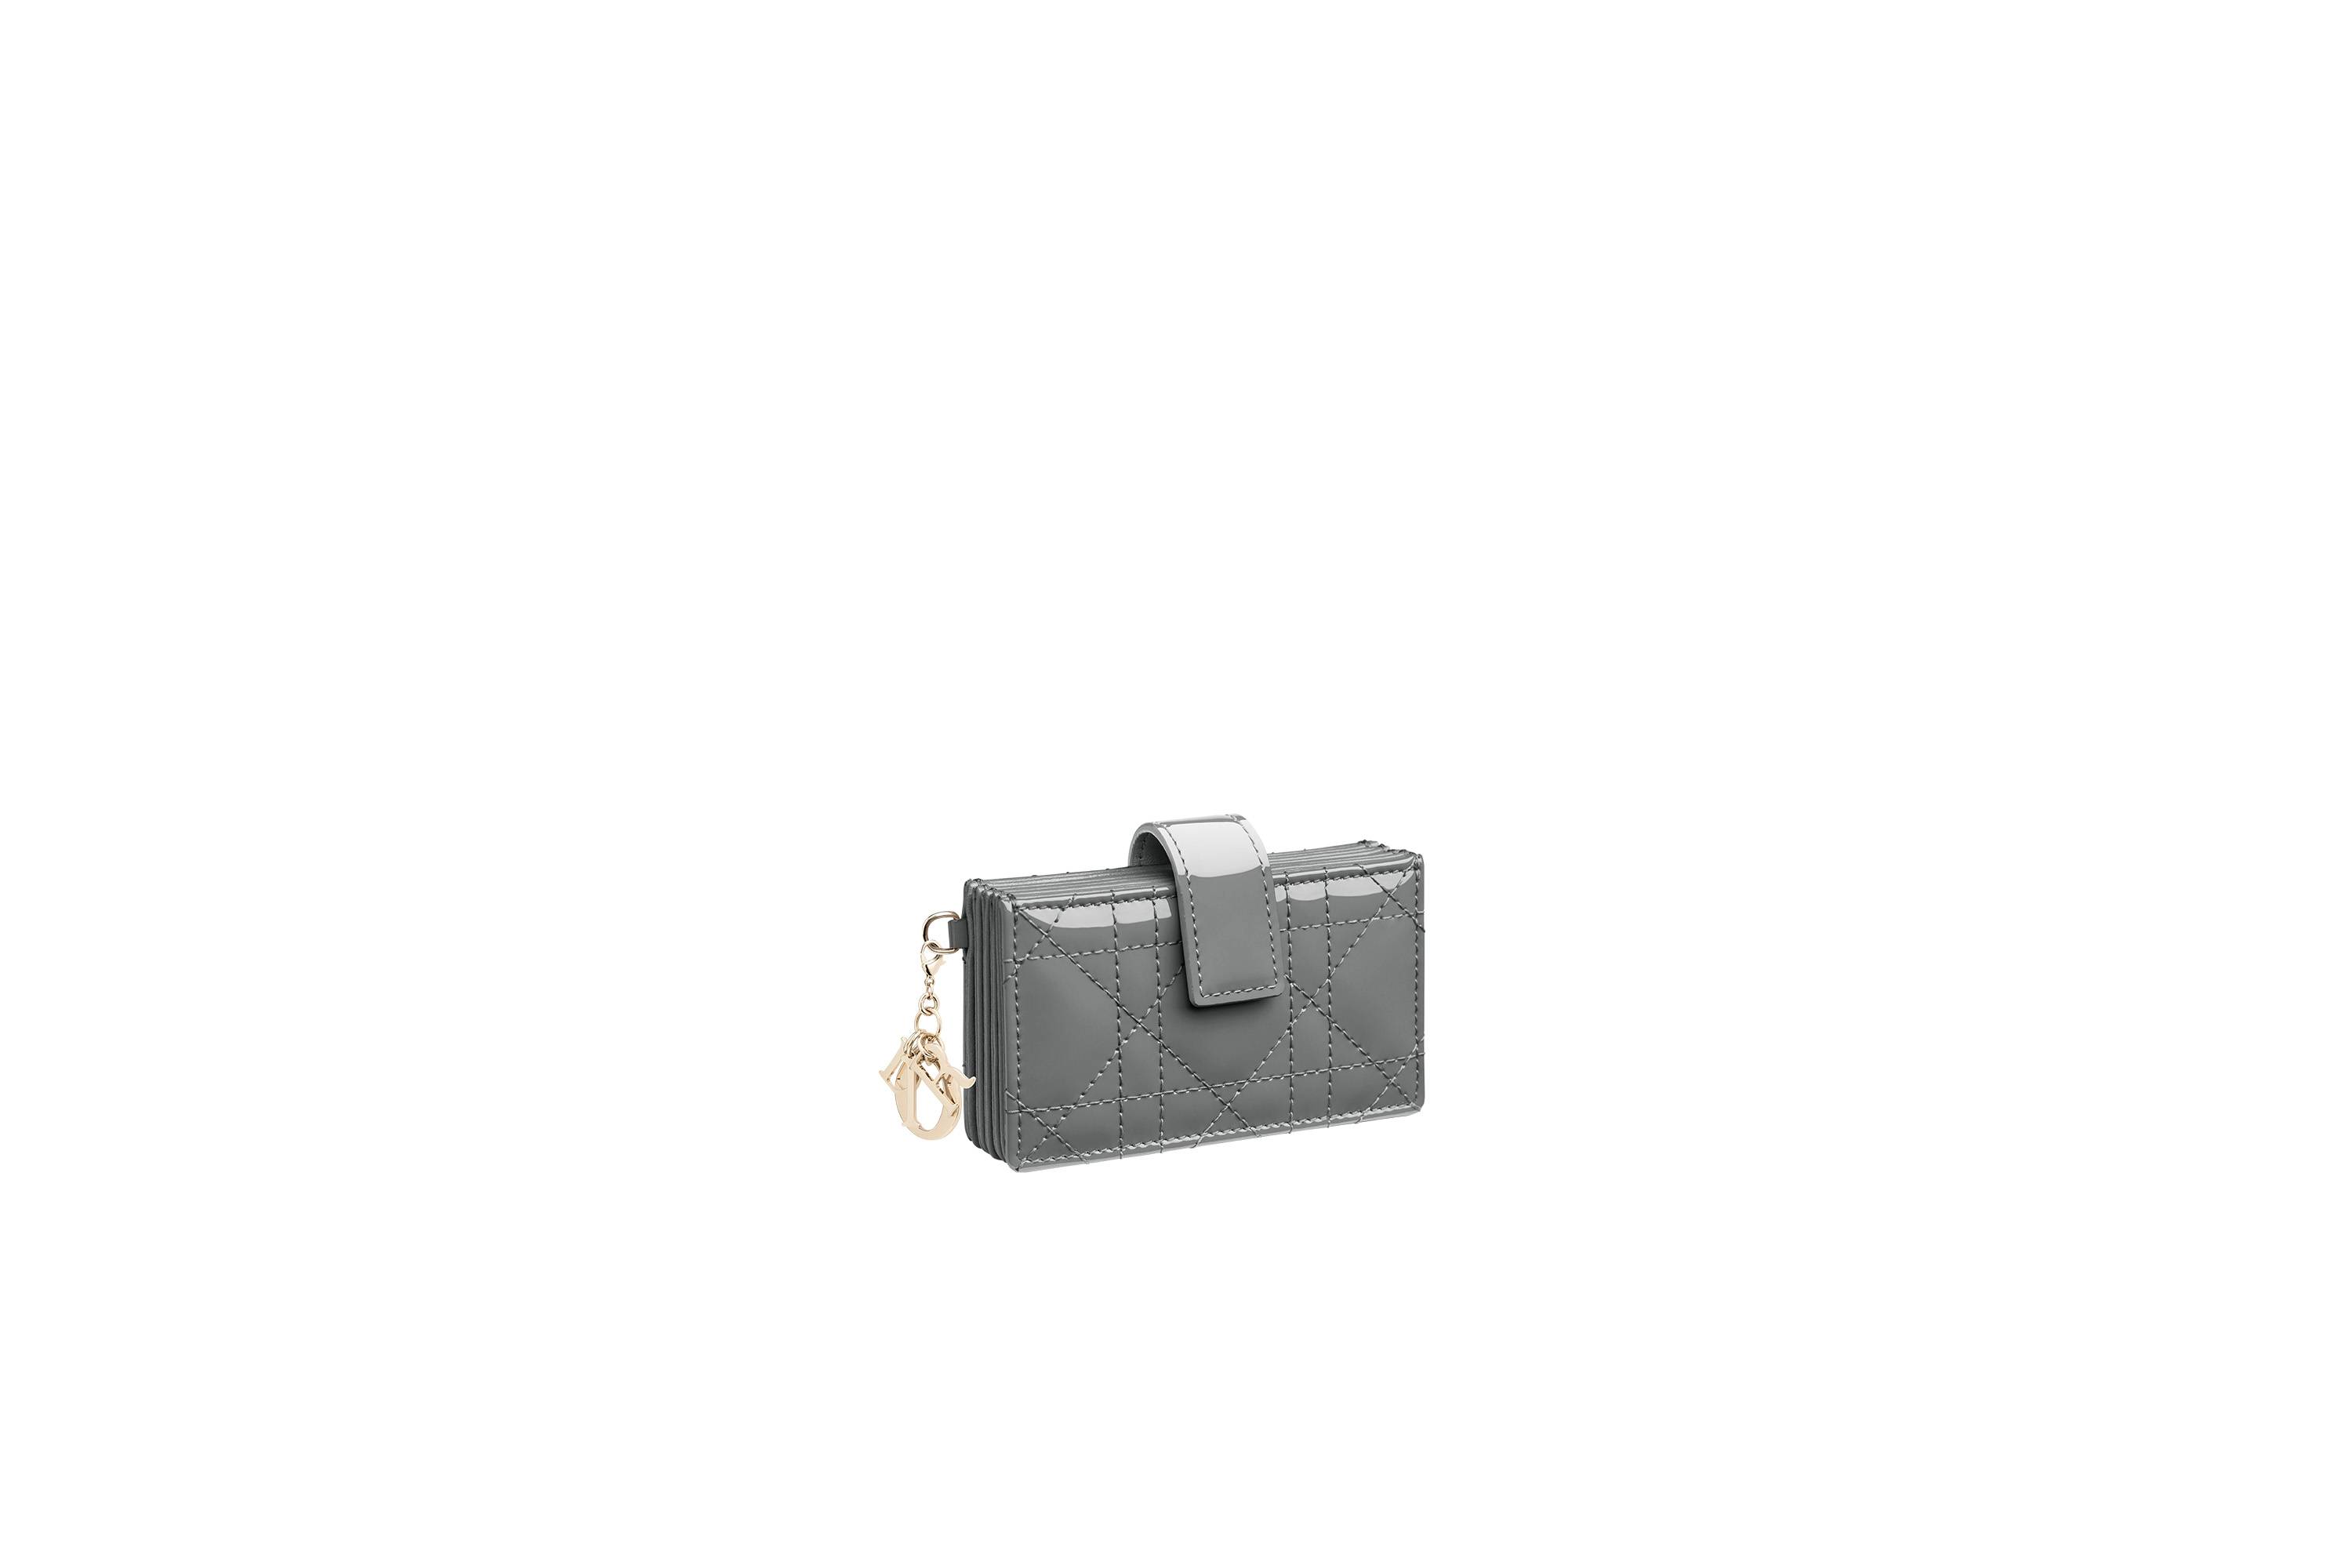 ''Lady Dior'' small card holder in gray stone patent calfskin. $2,950